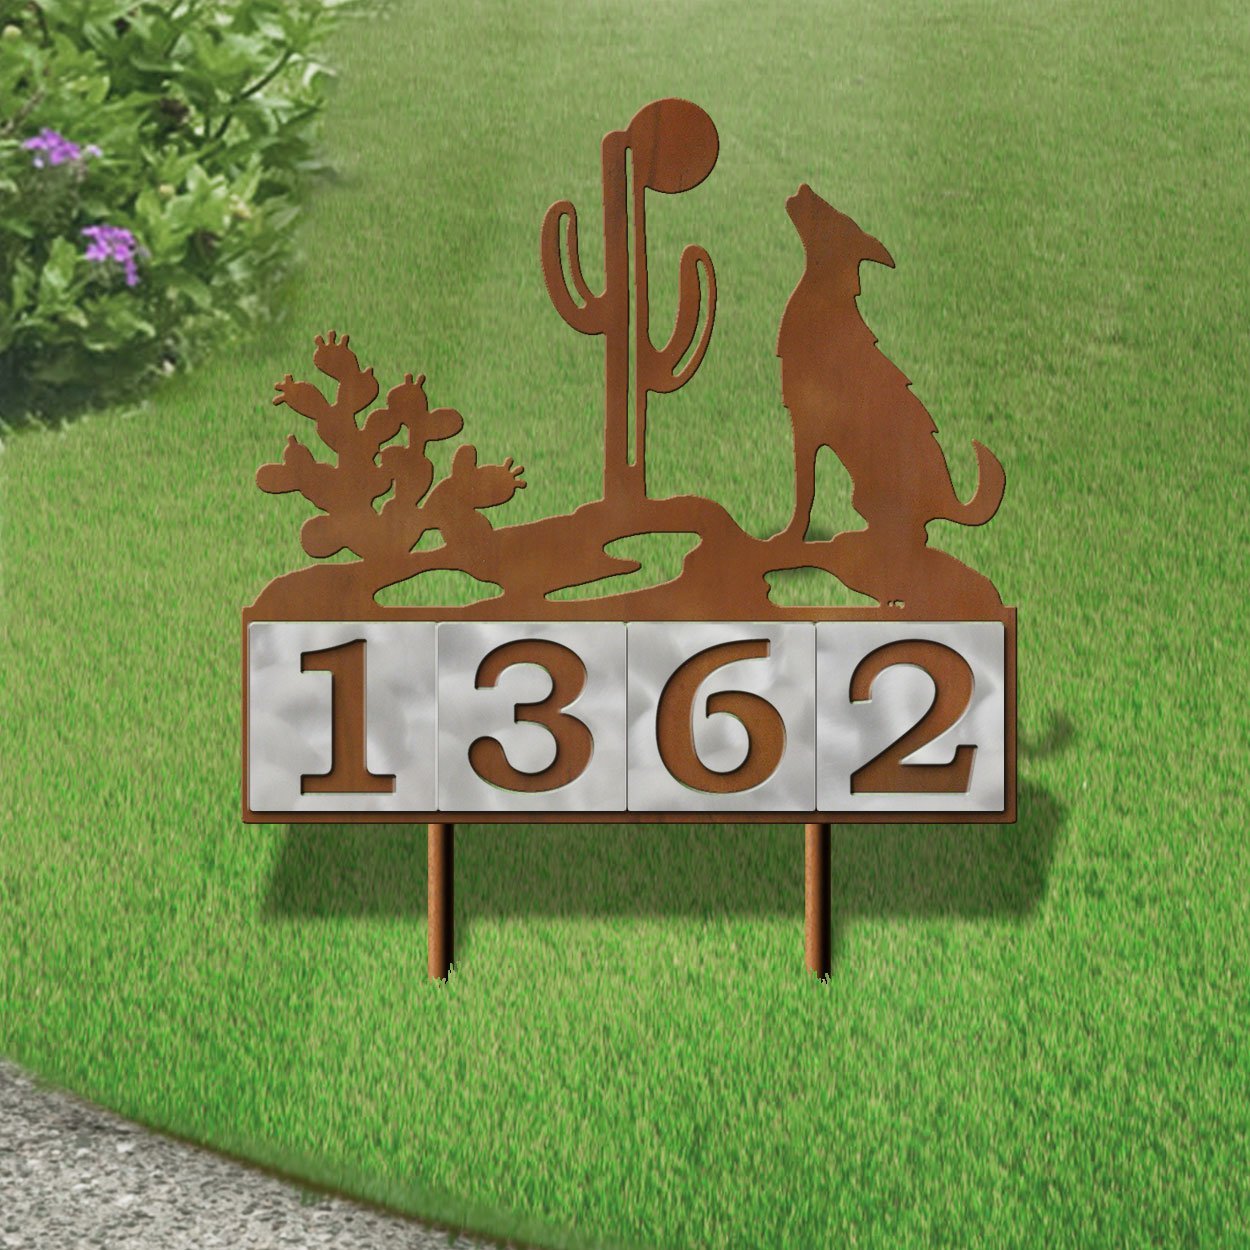 610084 - Howling Coyote Design 4-Digit Horizontal 6-inch Tile Outdoor House Numbers Yard Sign